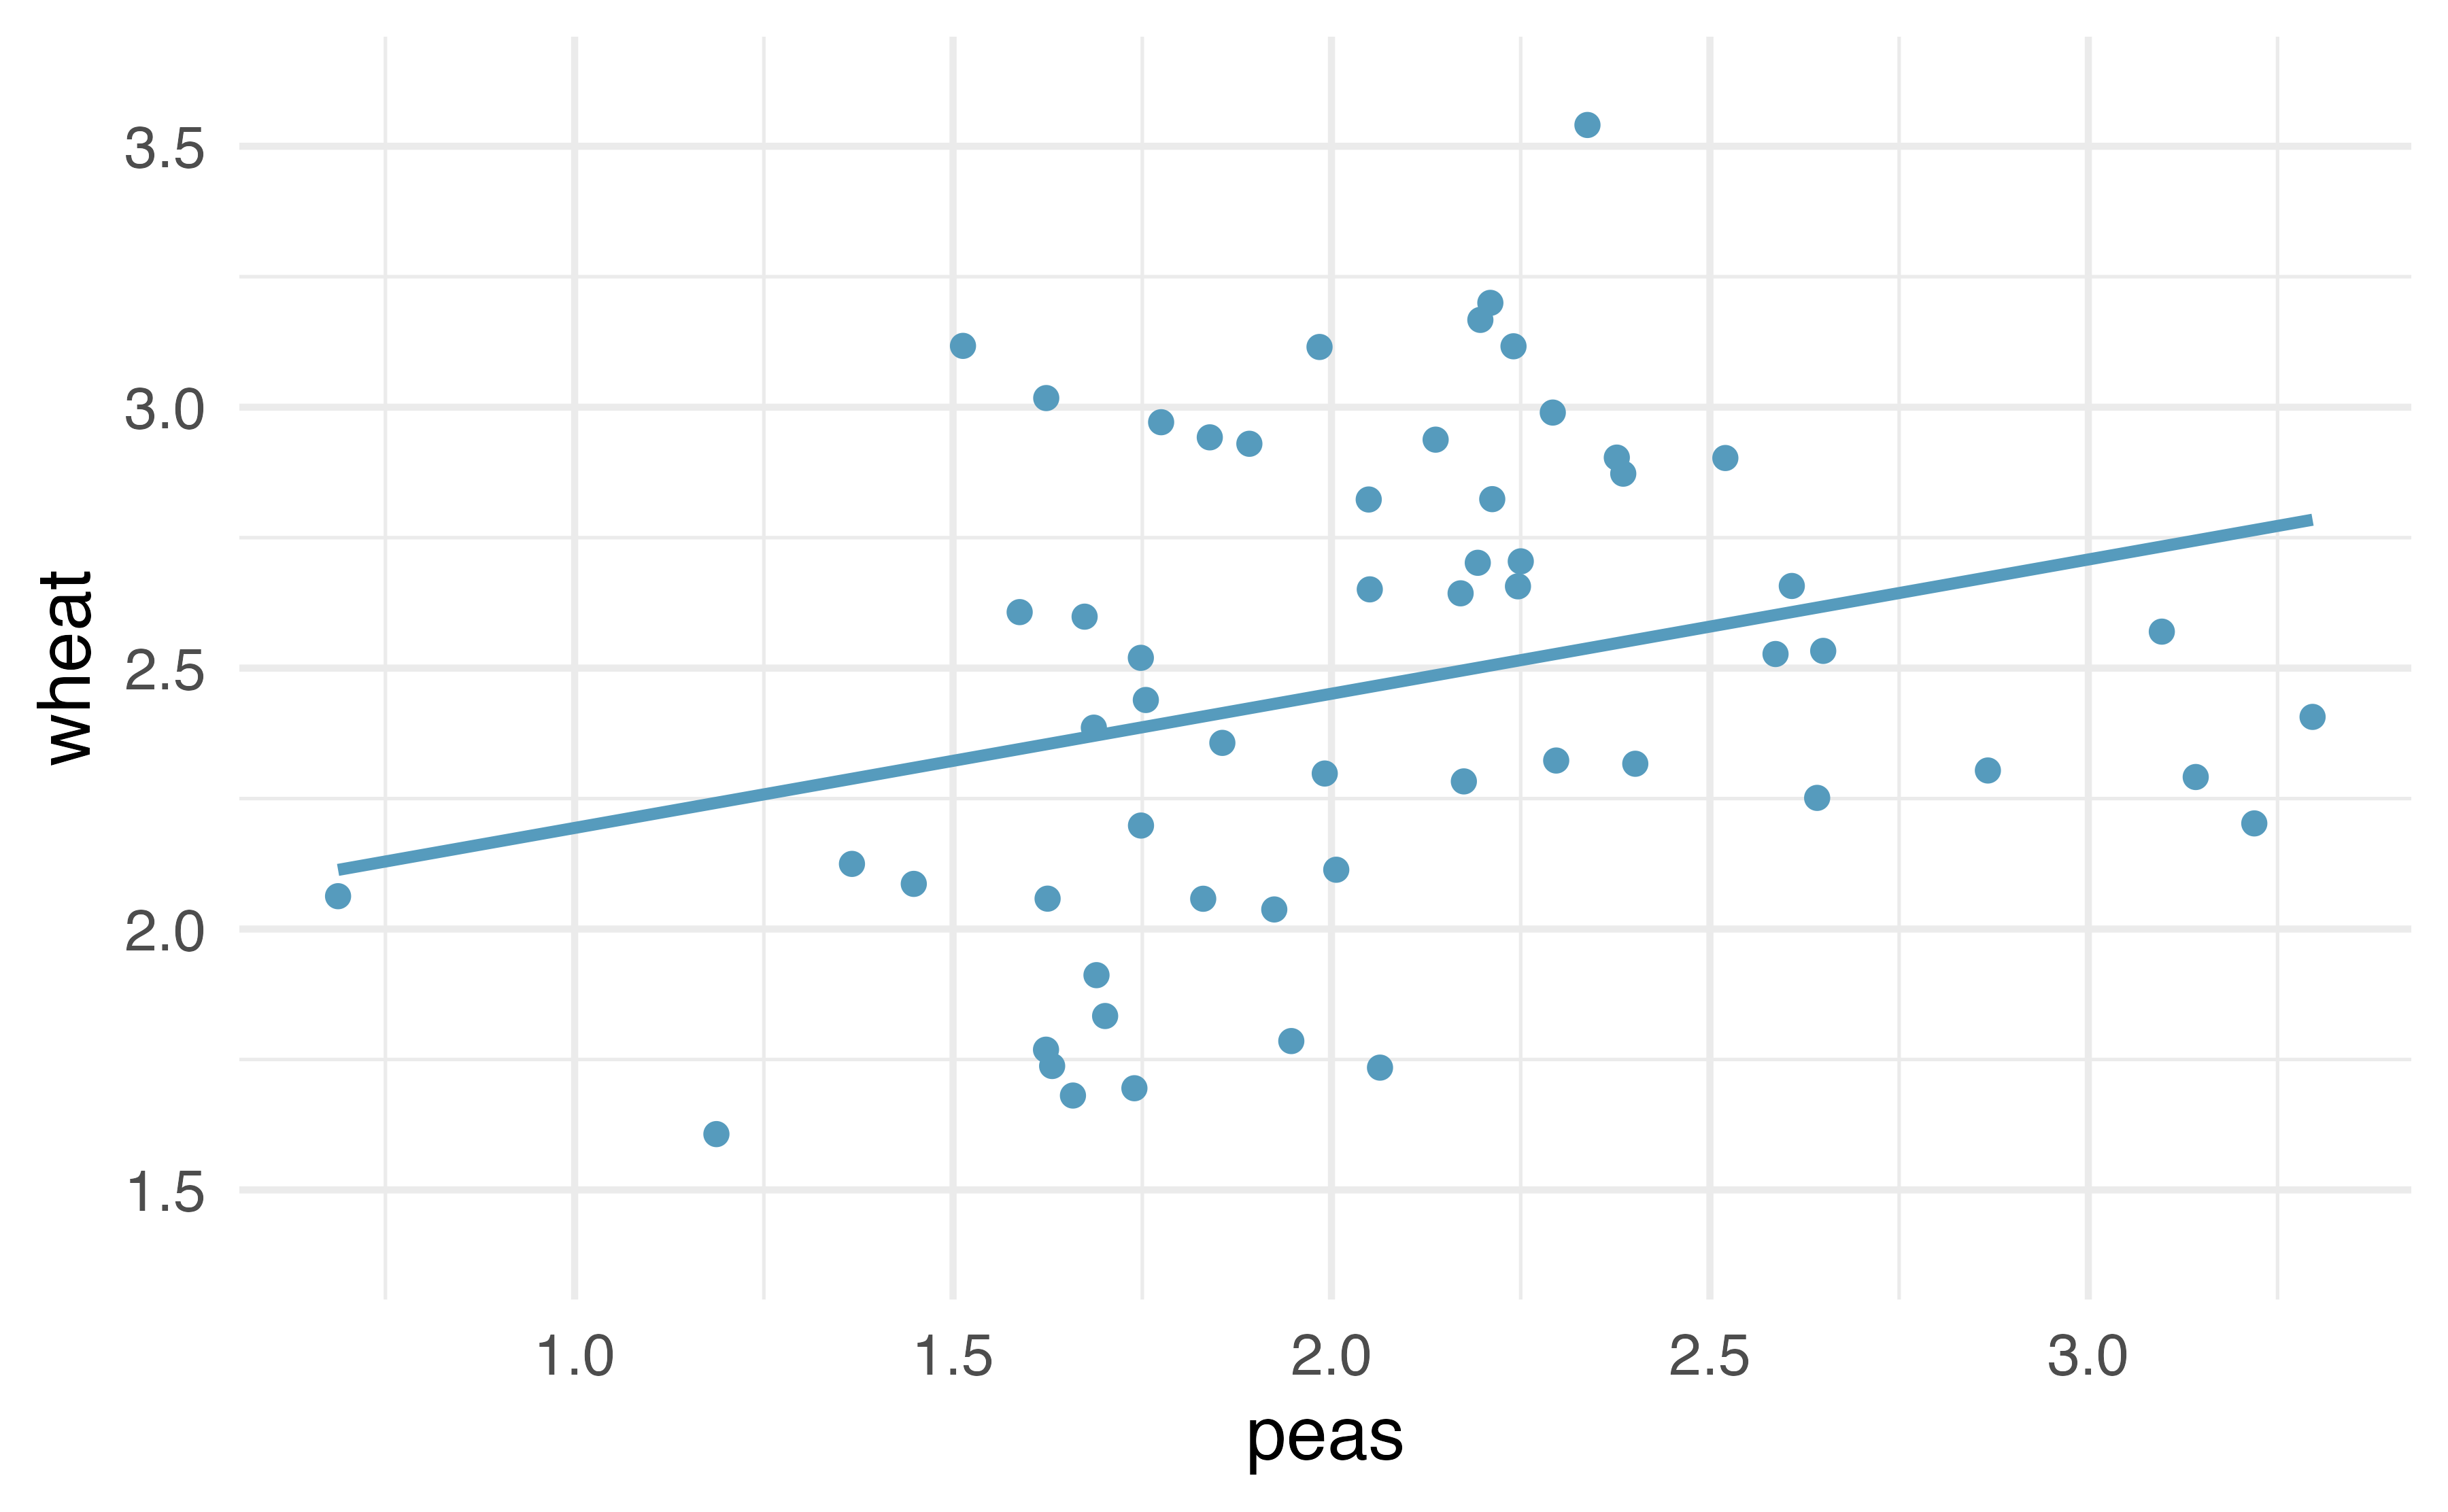 Original data: wheat yield as a linear model of peas yield, in tonnes per hectare.  Notice that the relationship between `peas` and `wheat` is not as strong as the relationship we saw previously between `maize` and `wheat`.